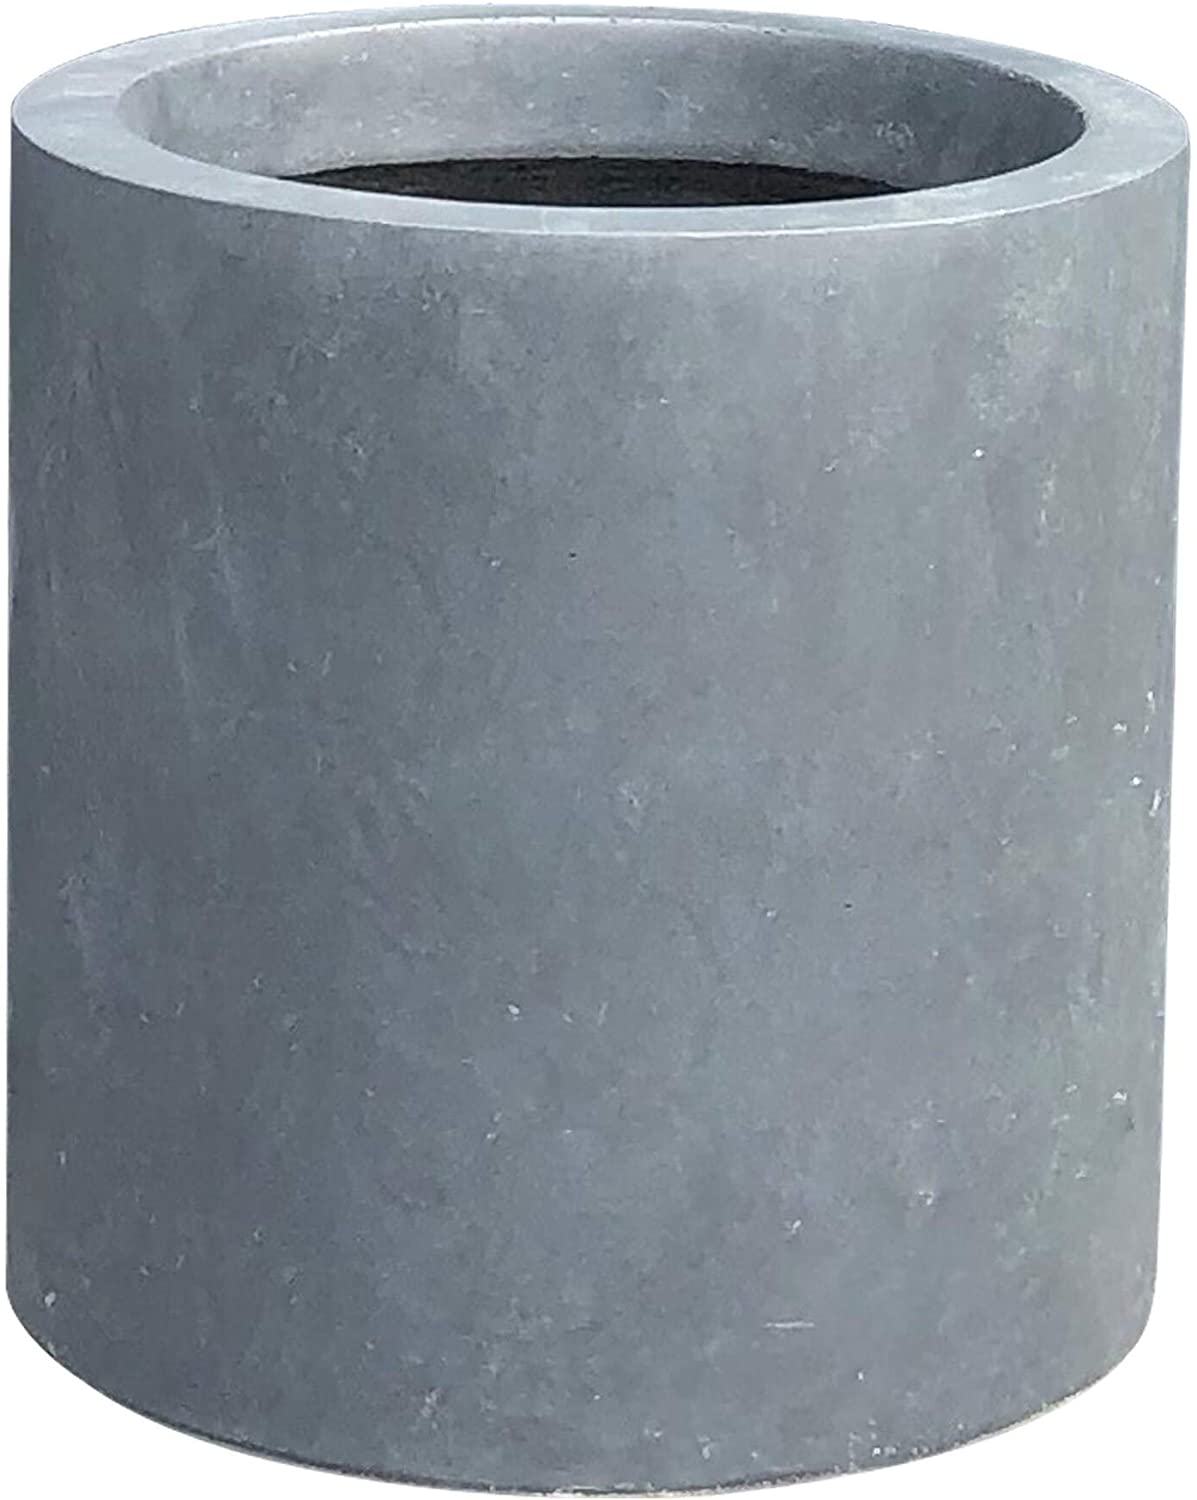 UKN Concrete Modern Outdoor Cylindrical Planter 9 8 Inch Tall Charcoal Black Round